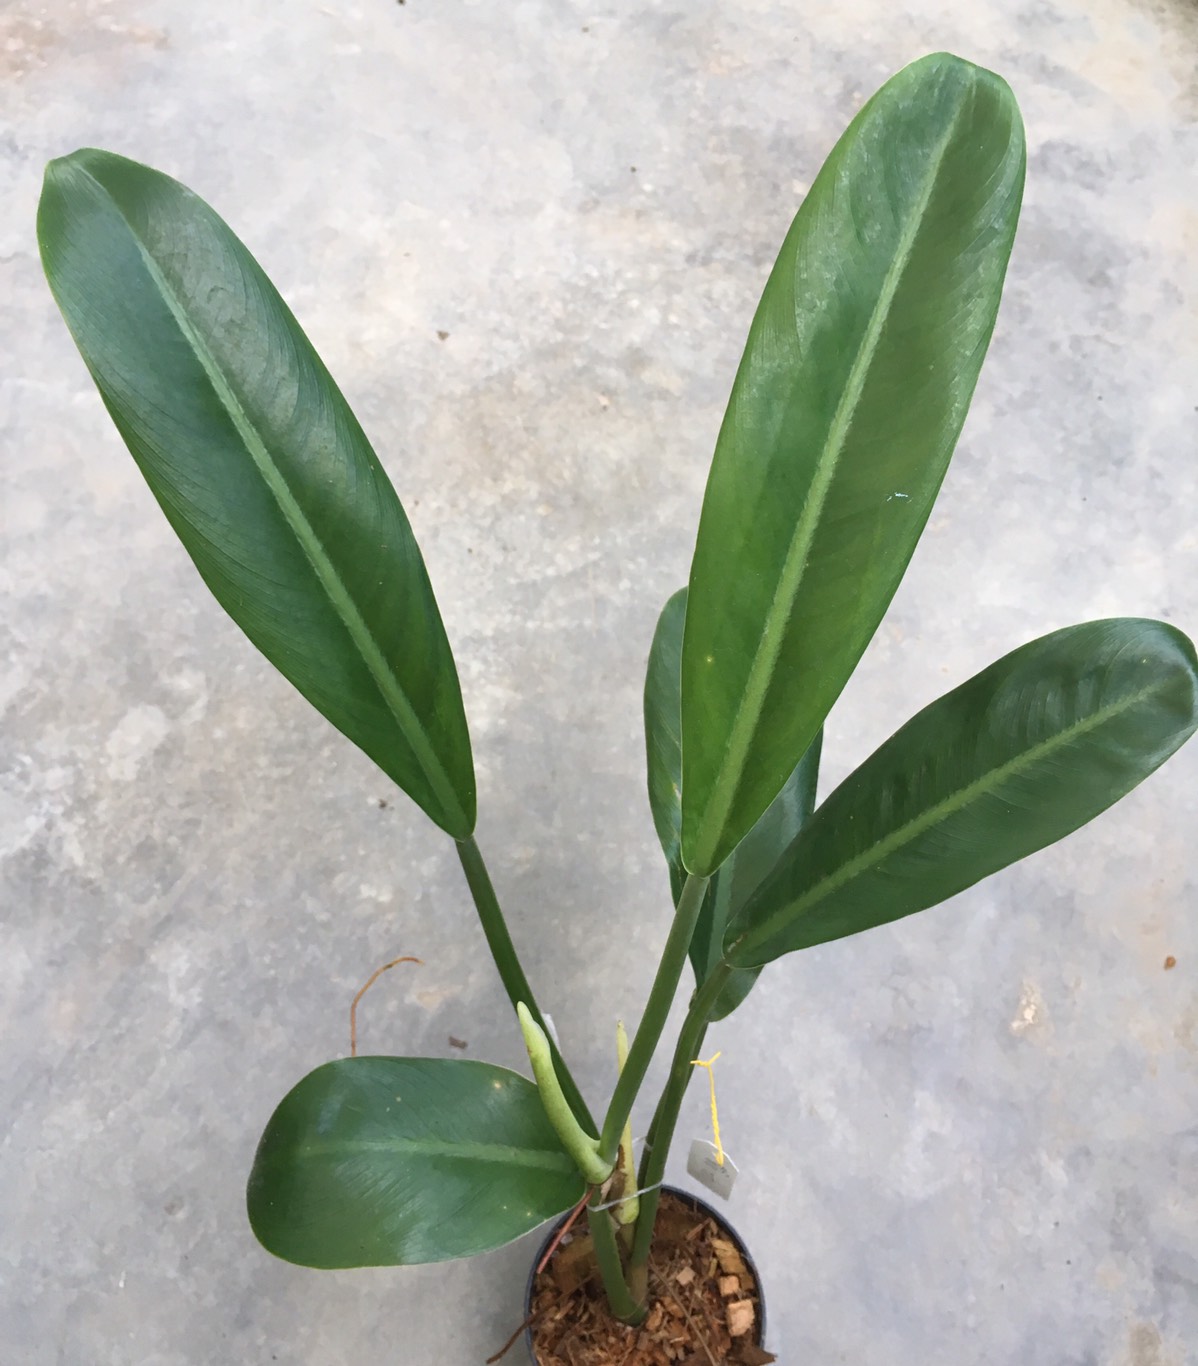 Philodendron sp.(T34